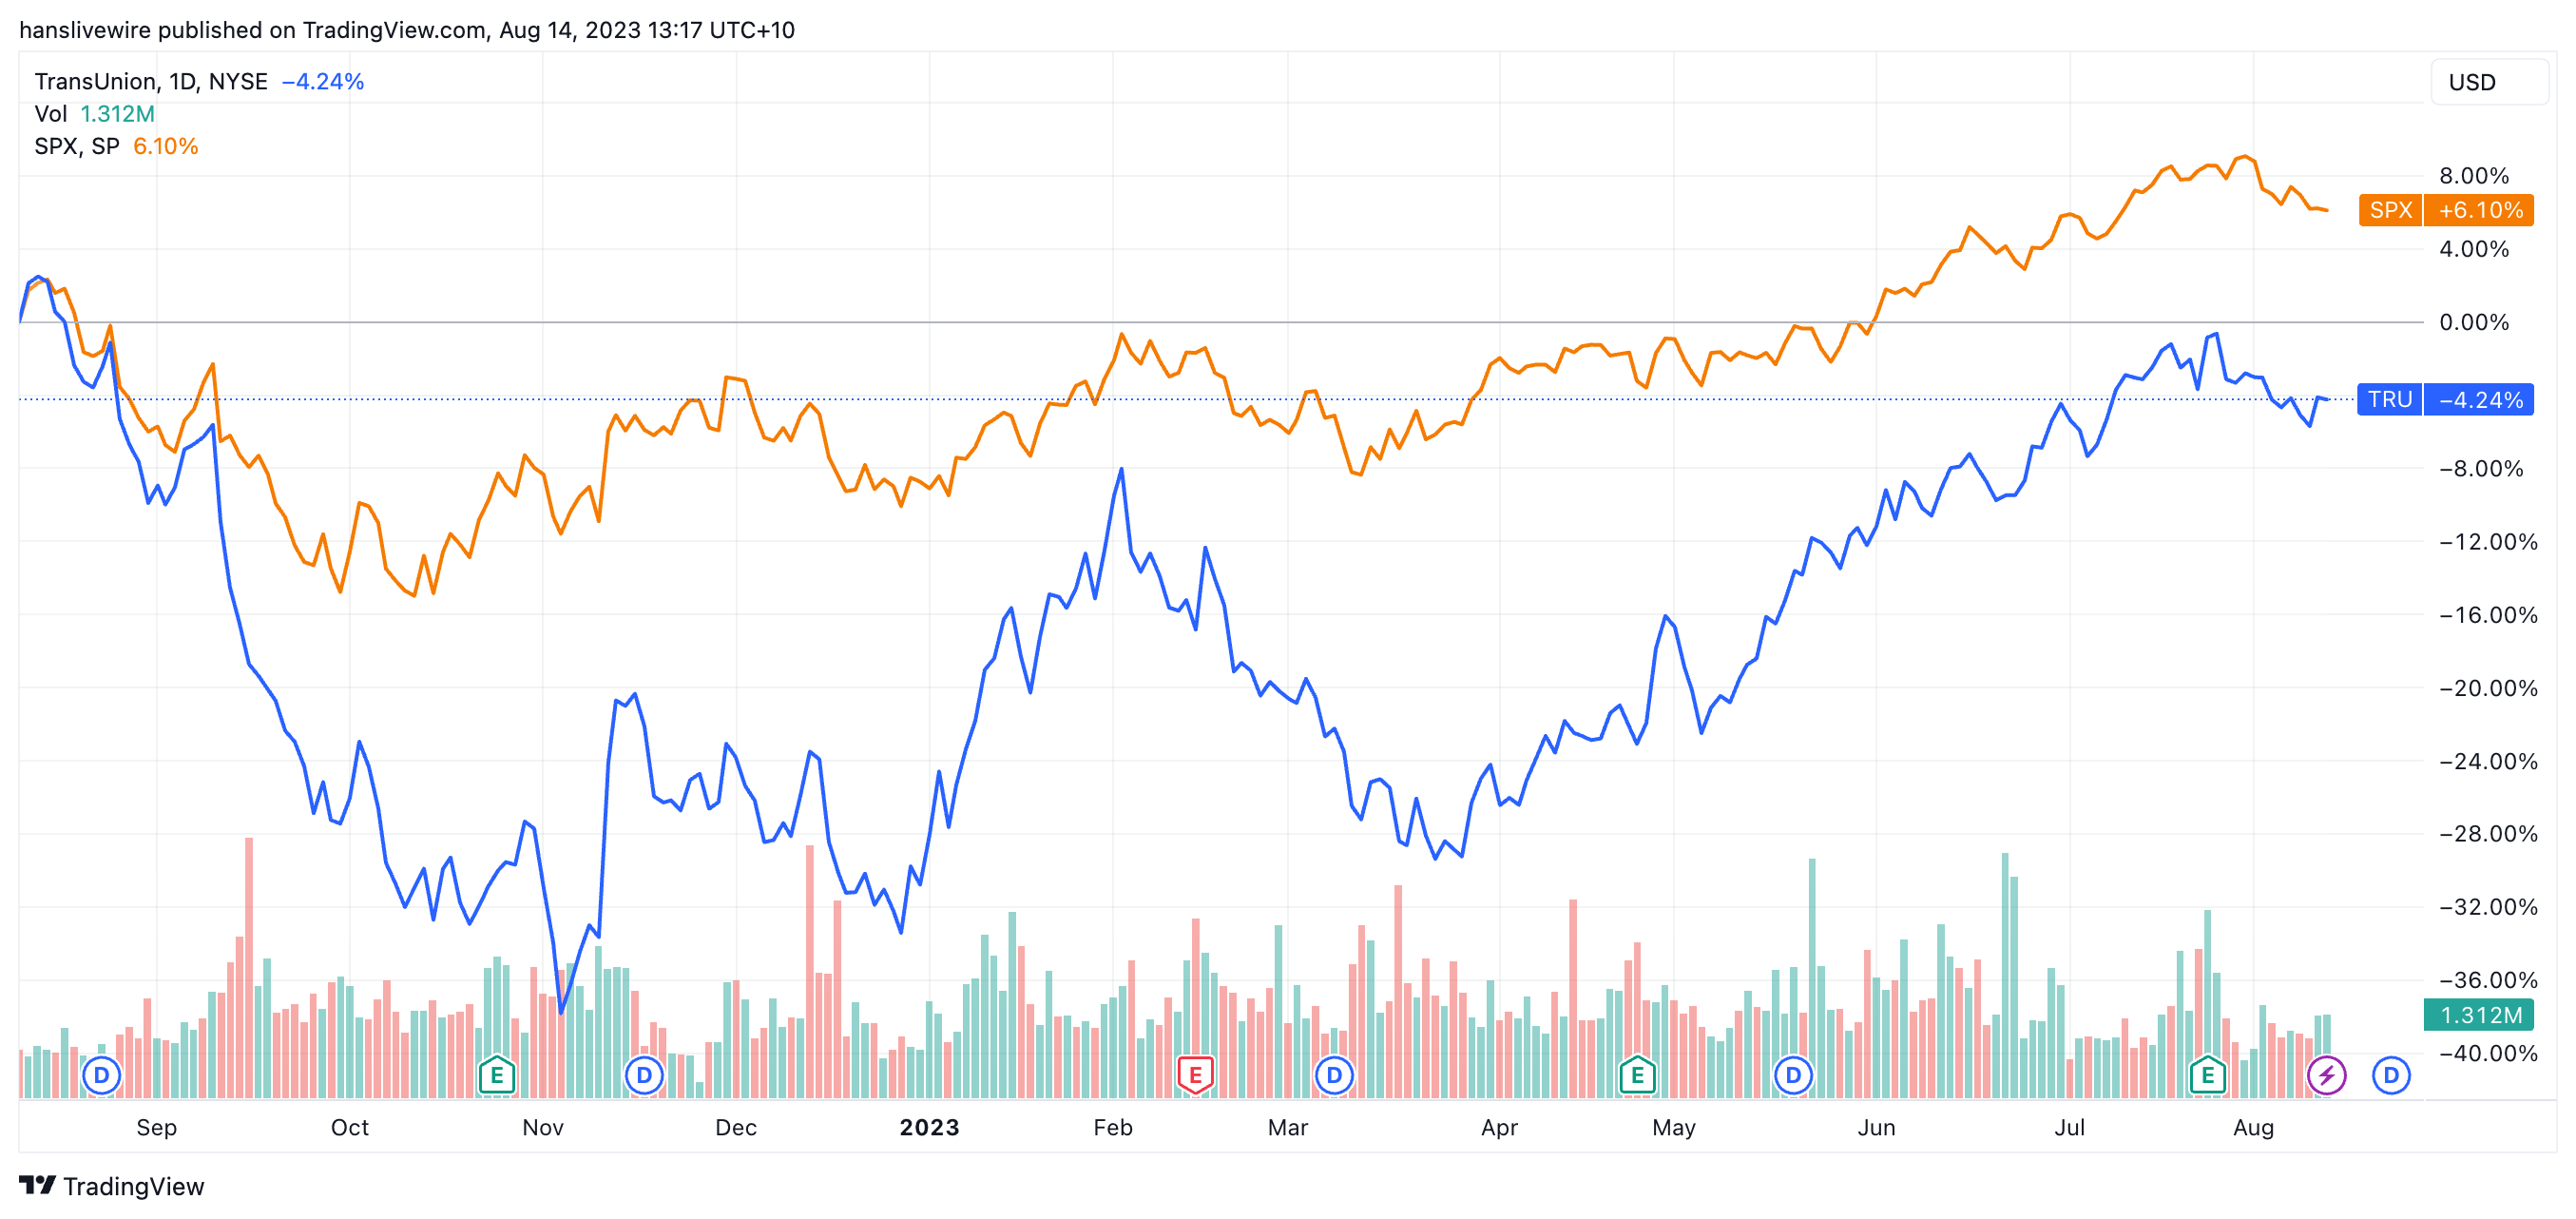 TransUnion share price vs S&P 500 over the past year (Source: TradingView)